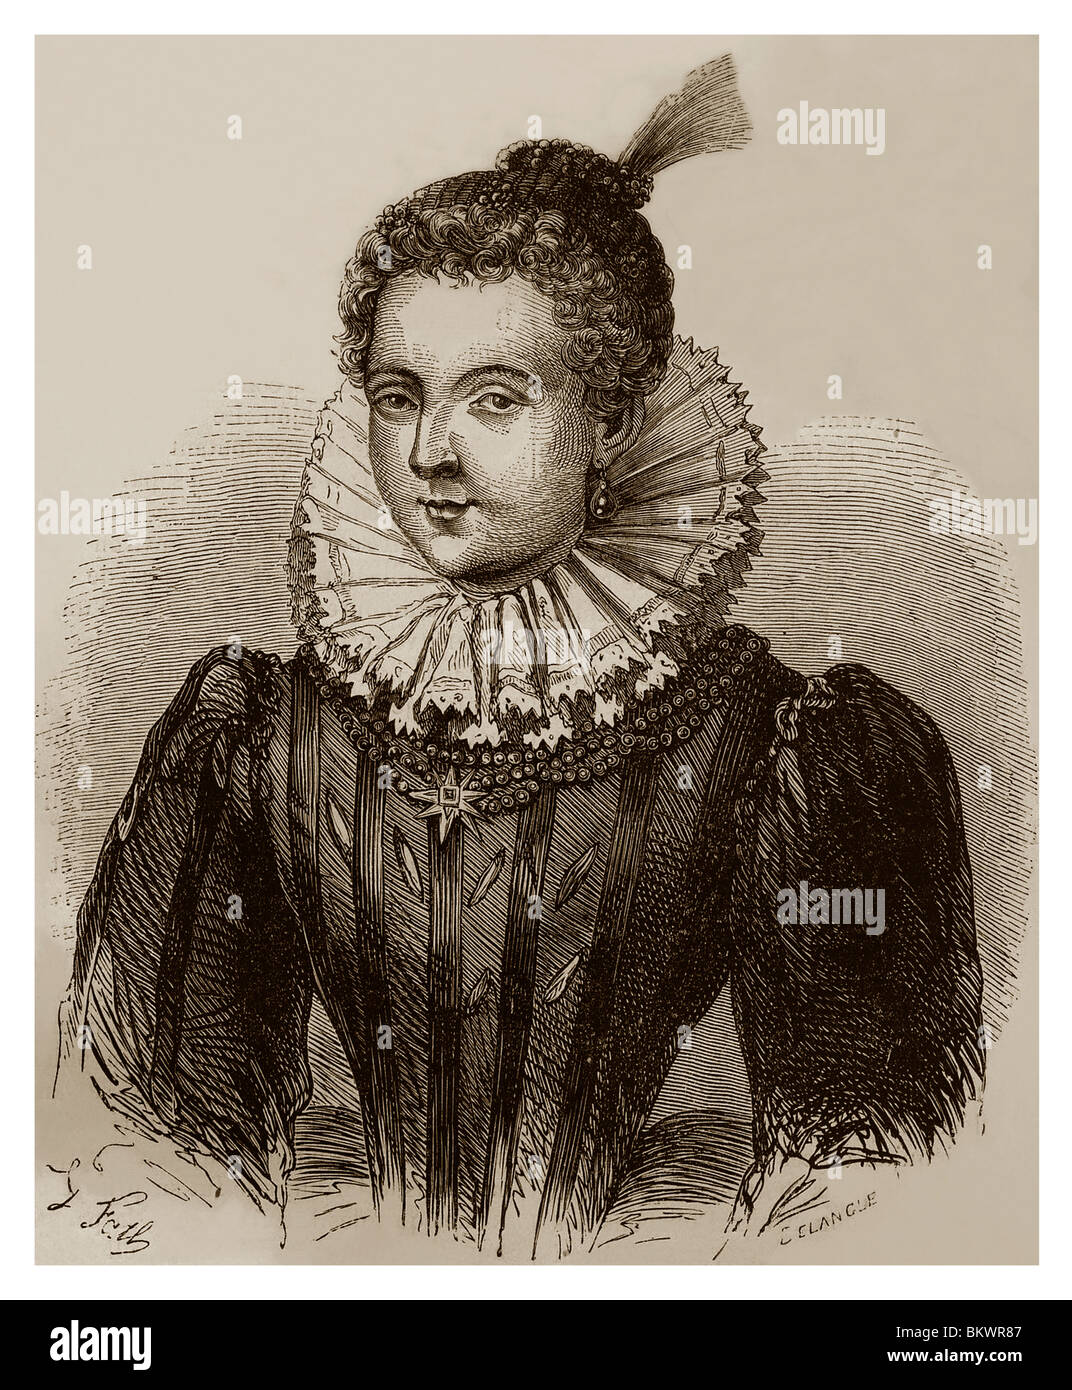 Henriette d' Entragues (1579-1633): Favourite mistress of King Henry IV of France from 1599. Stock Photo